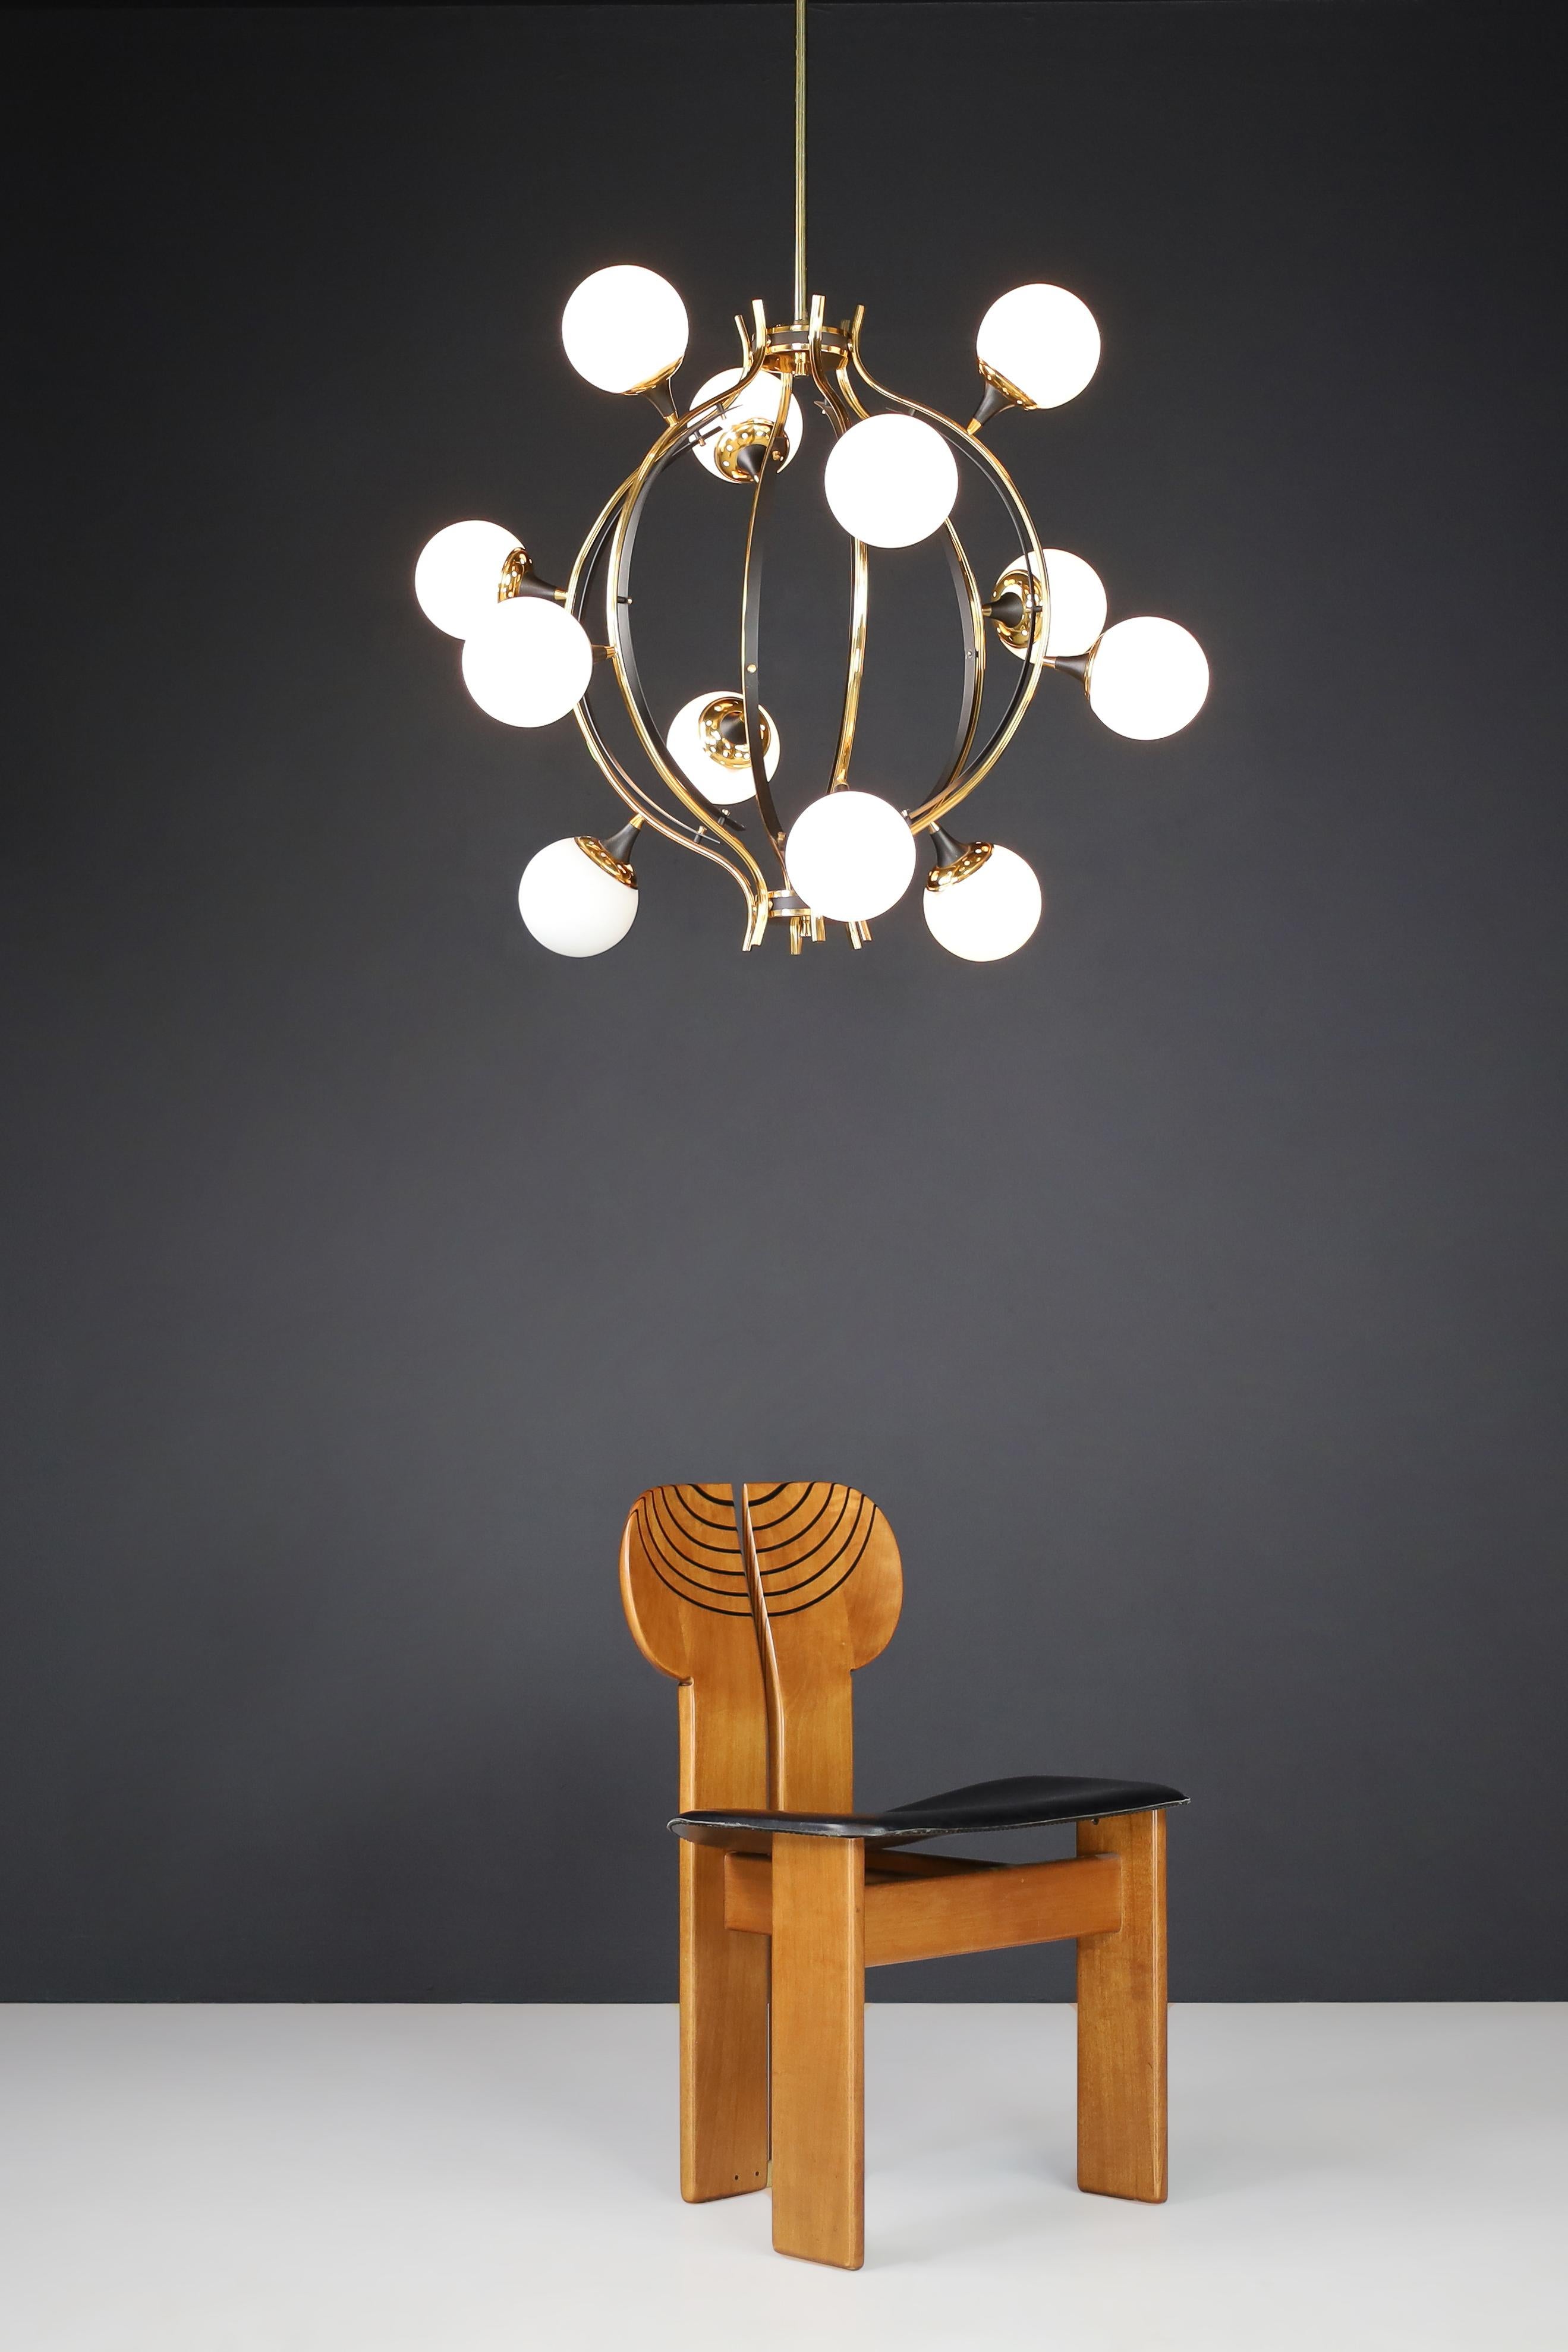 Midcentury Stilnovo Chandelier in Brass and 12 Opaline Globes, Italy 1950s For Sale 9